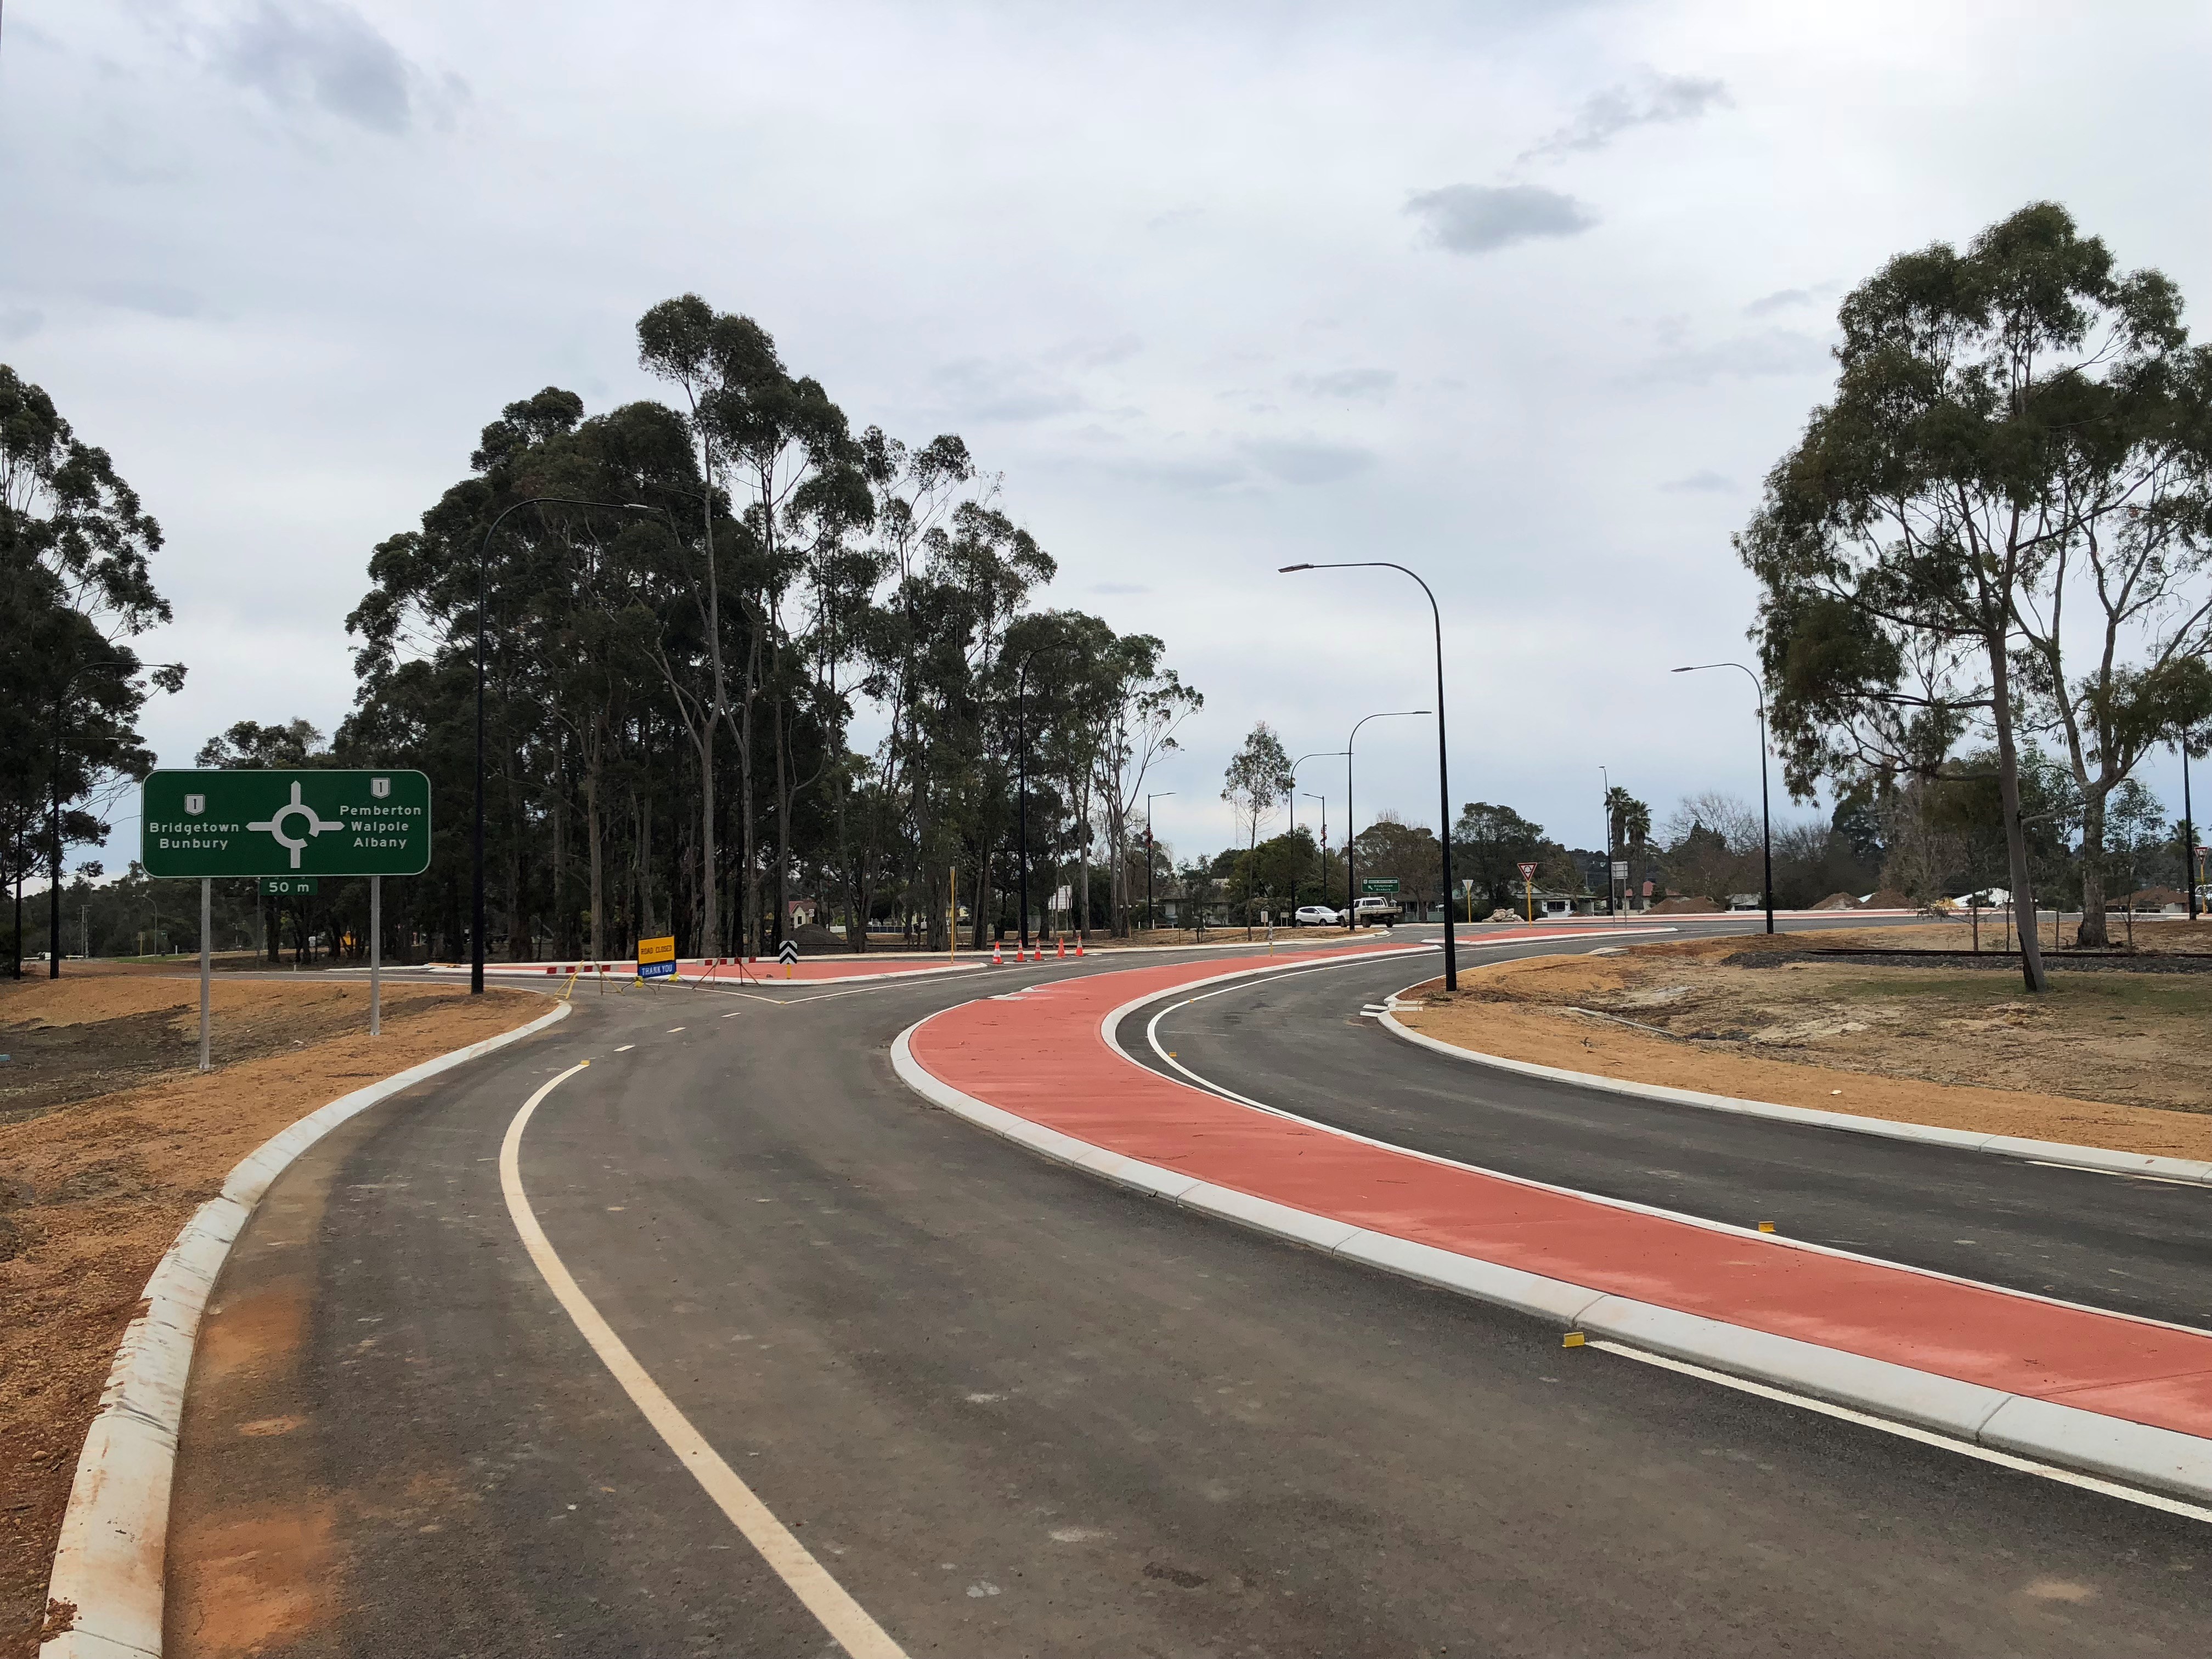 Entrance to new roundabout from the car park